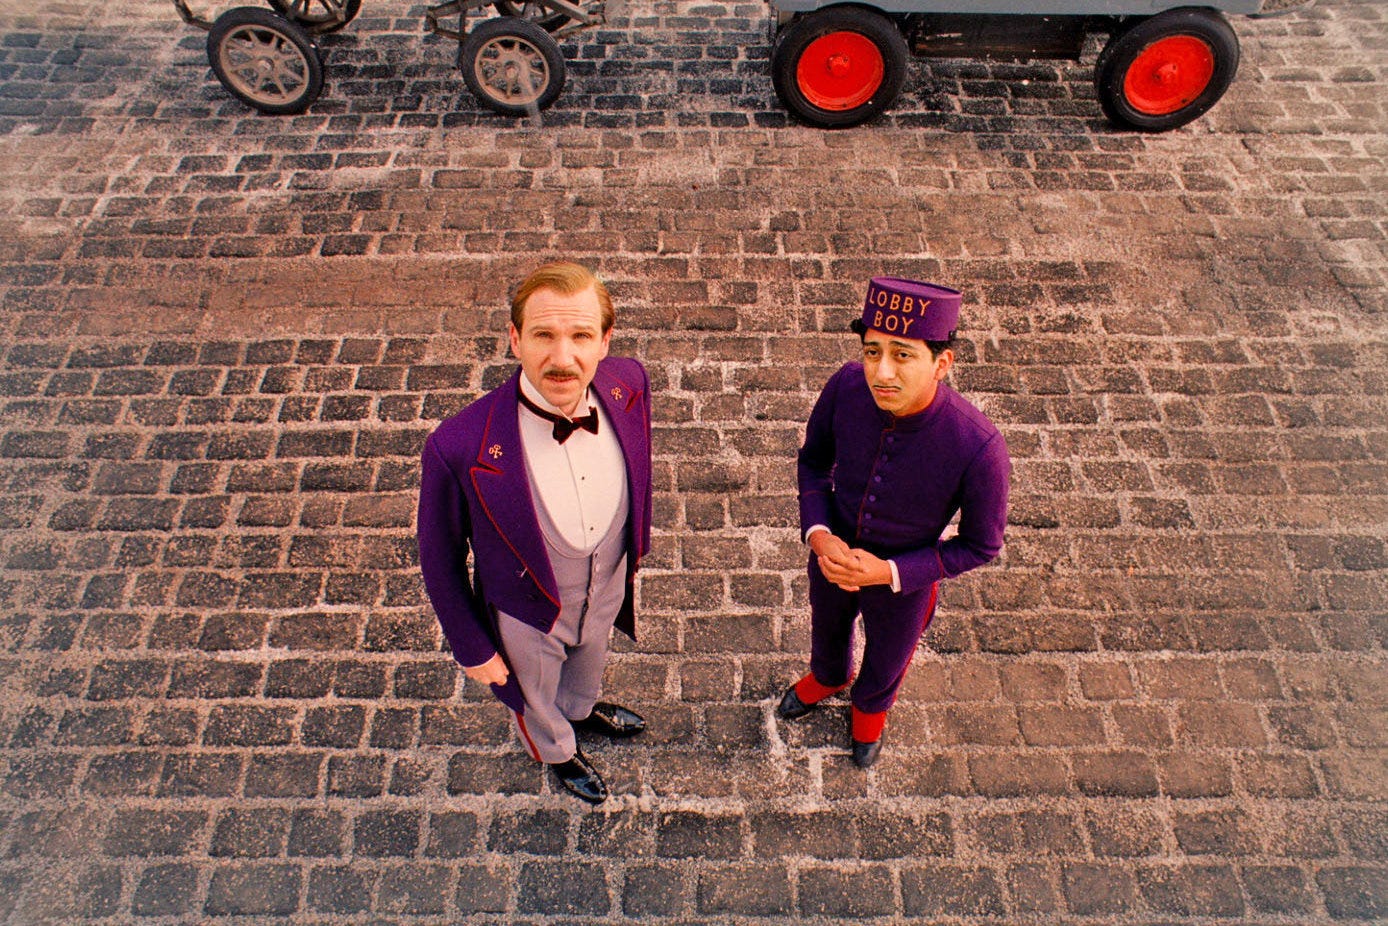 Gustave and Zero in Wes Anderson's The Grand Budapest Hotel.